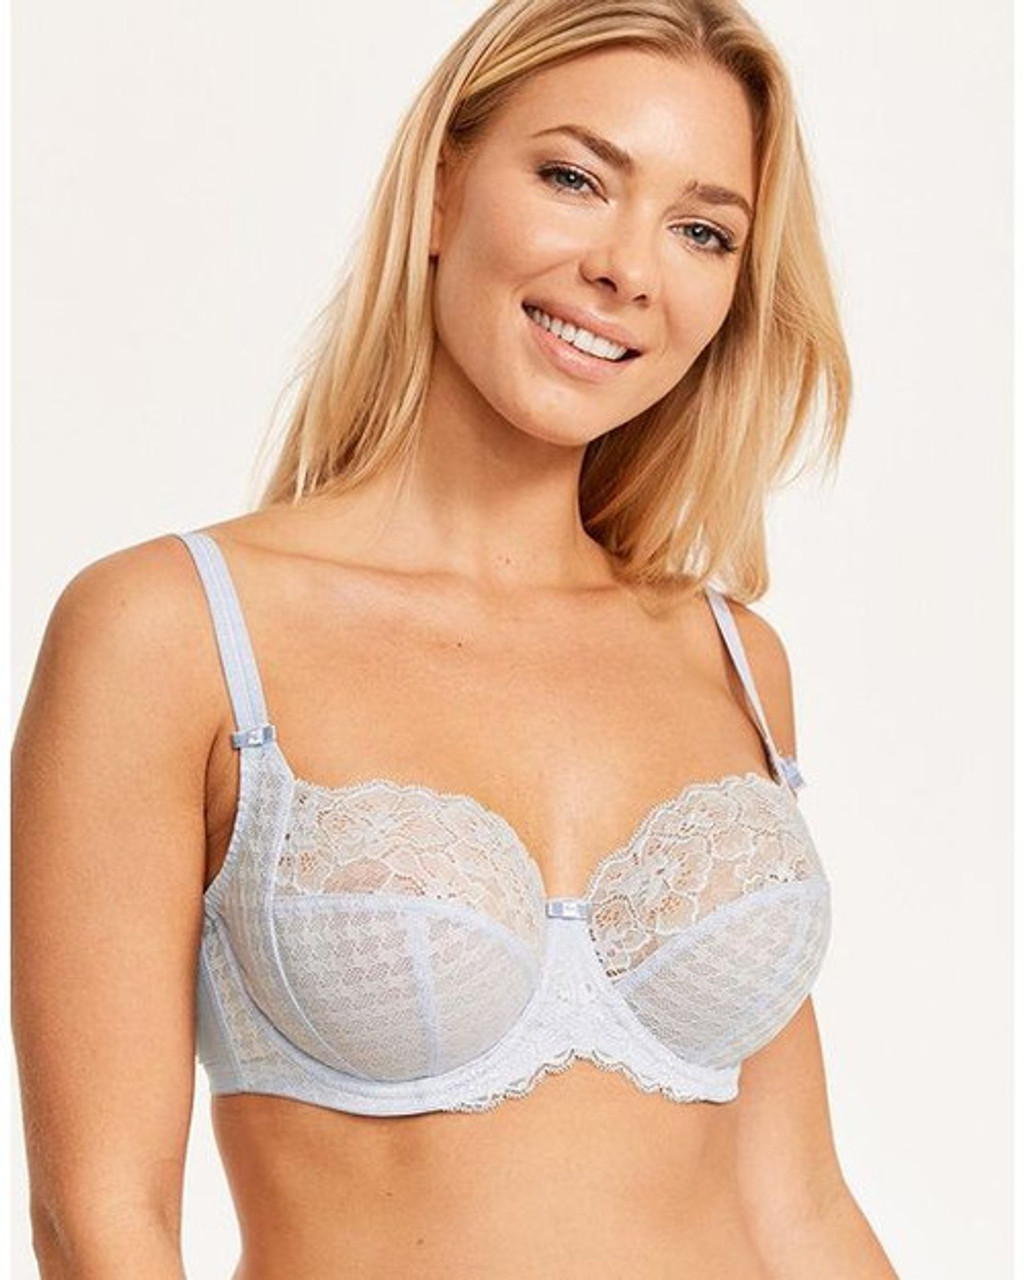 NWT Fantasie full cup Bra, size 36HH (UK), 36L (US)